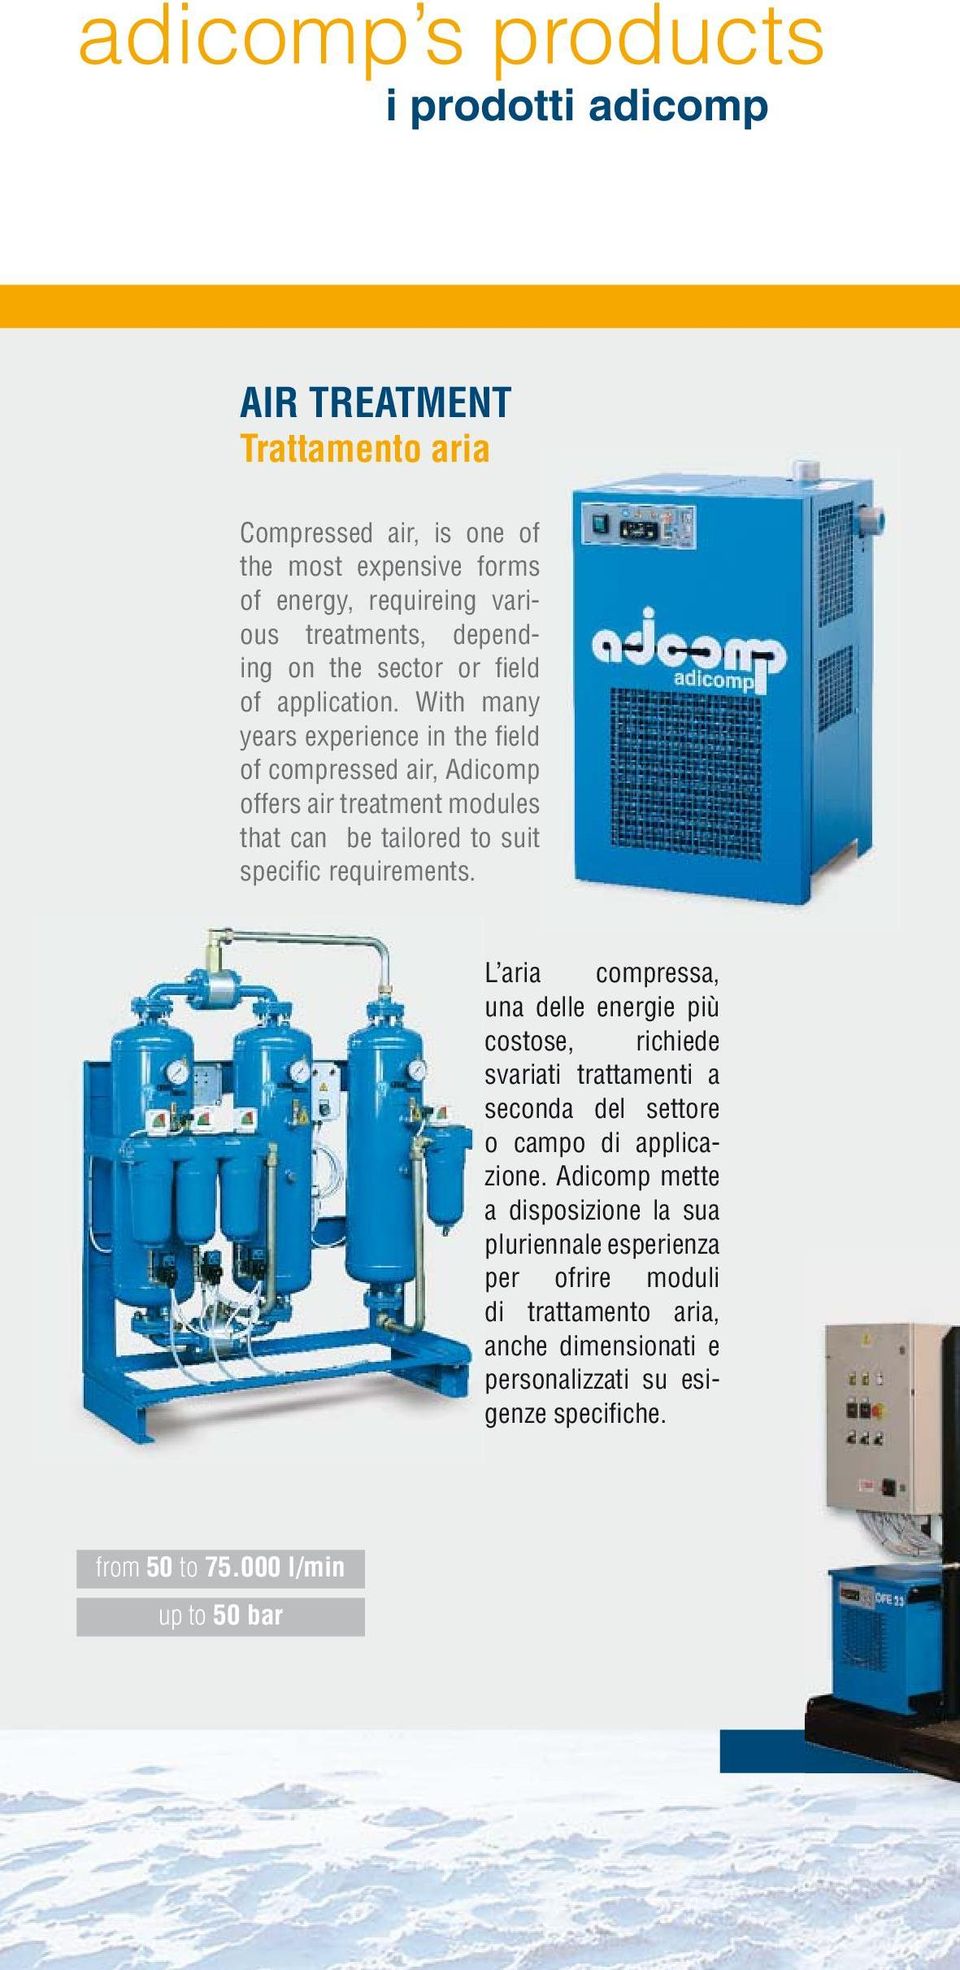 With many years experience in the fi eld of compressed air, Adicomp offers air treatment modules that can be tailored to suit specifi c requirements.